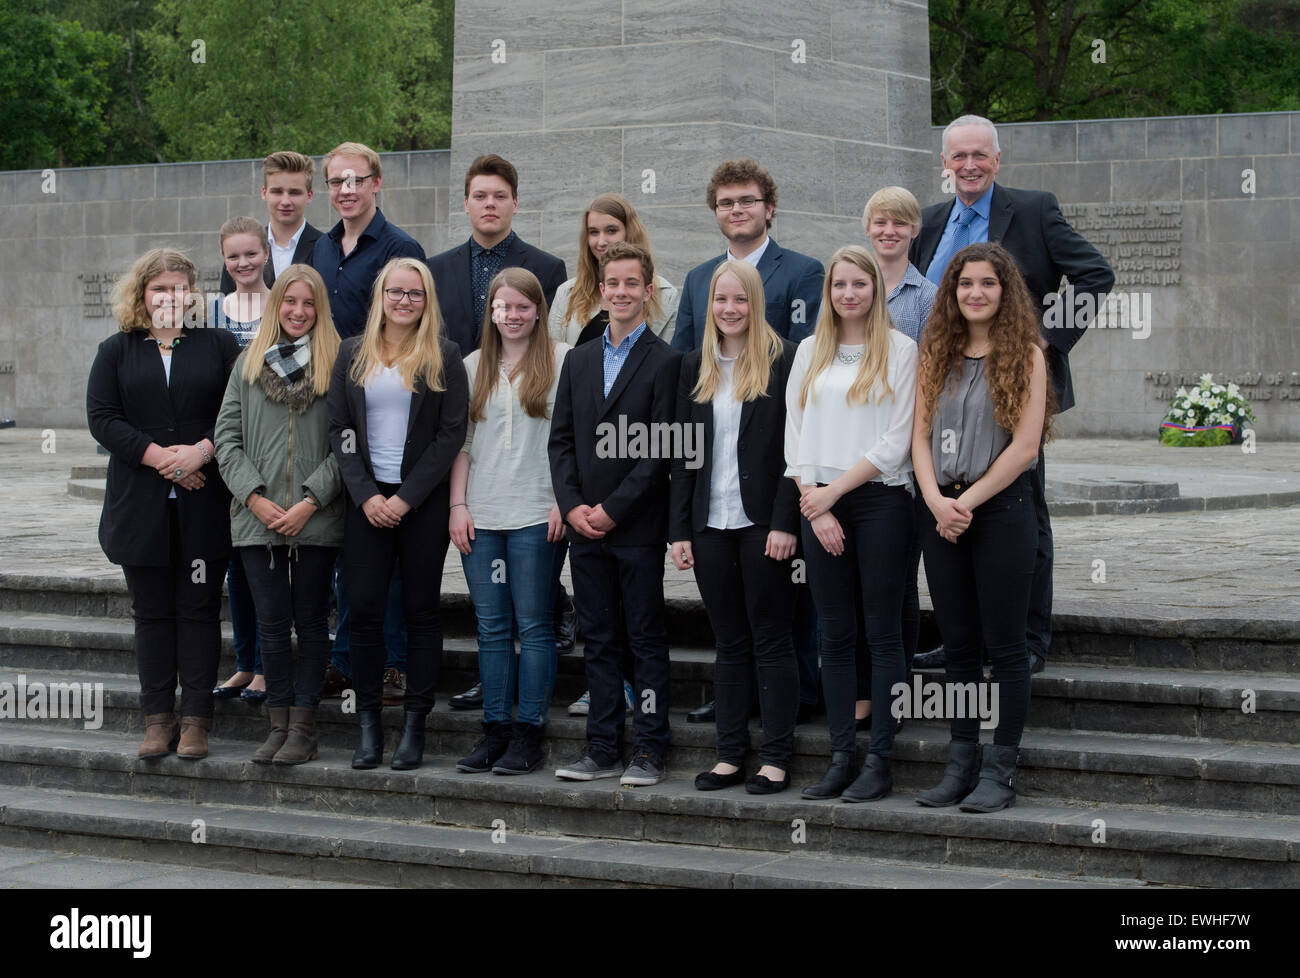 Celle, Germany. 26th June, 2015. Pupils of the Kaiserin-Auguste-Viktoria-Gymnasium school in Celle pictured after meeting the queen at the site of former Bergen-Belsen concentration camp, in Bergen near Celle, Germany, 26 June 2015. Queen Elizabeth II and The Duke of Edinburgh were on their fifth state visit to Germany from 23 to 26 June. Photo: Julian Stratenschulte/dpa/Alamy Live News Stock Photo